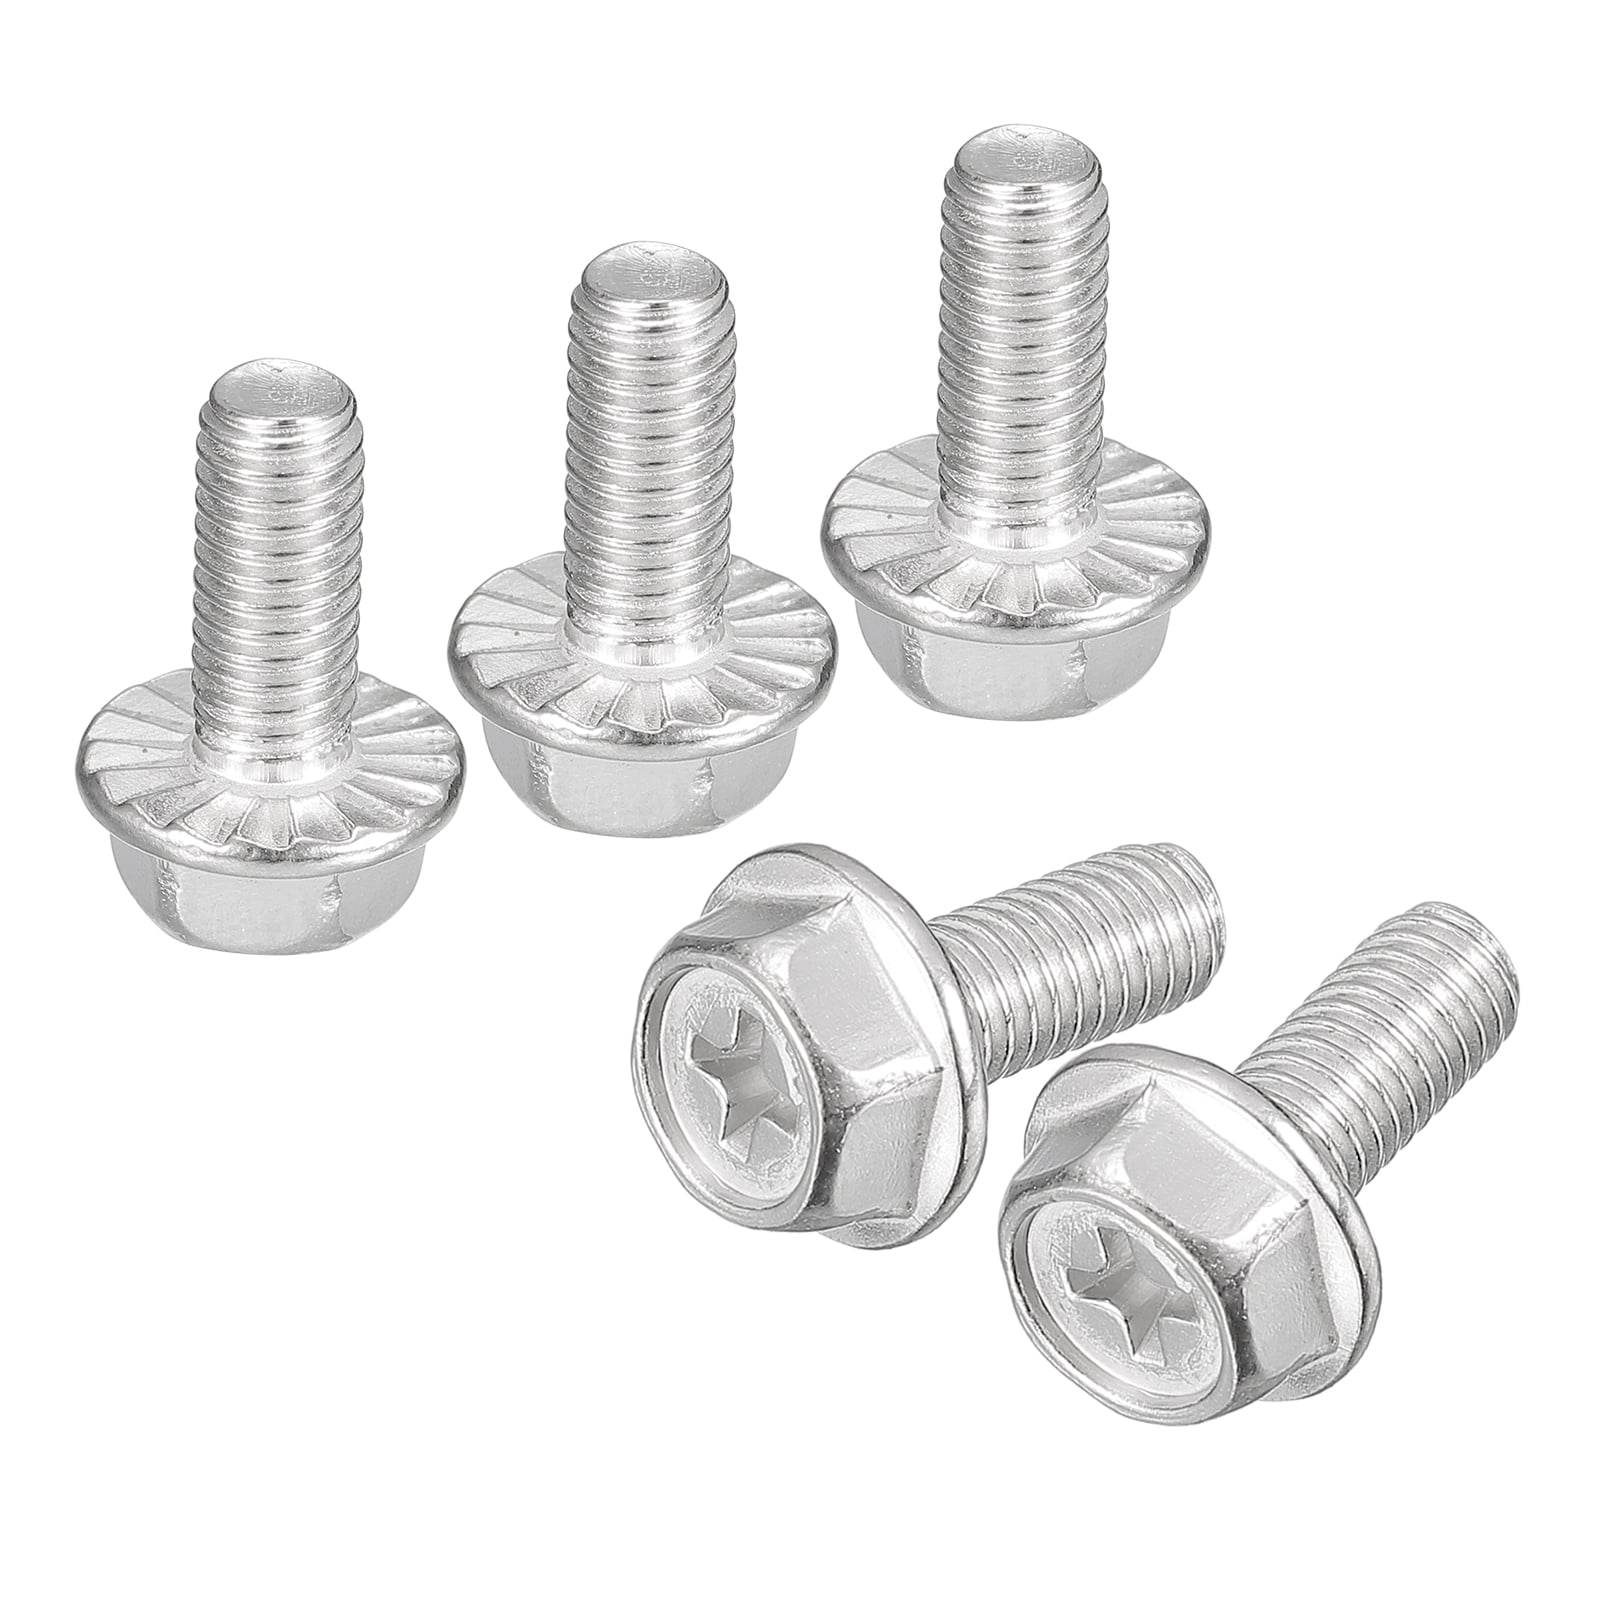 M6x14mm Phillips Hex Head Flange Bolts, 10 Pack 304 Stainless Steel Screws 